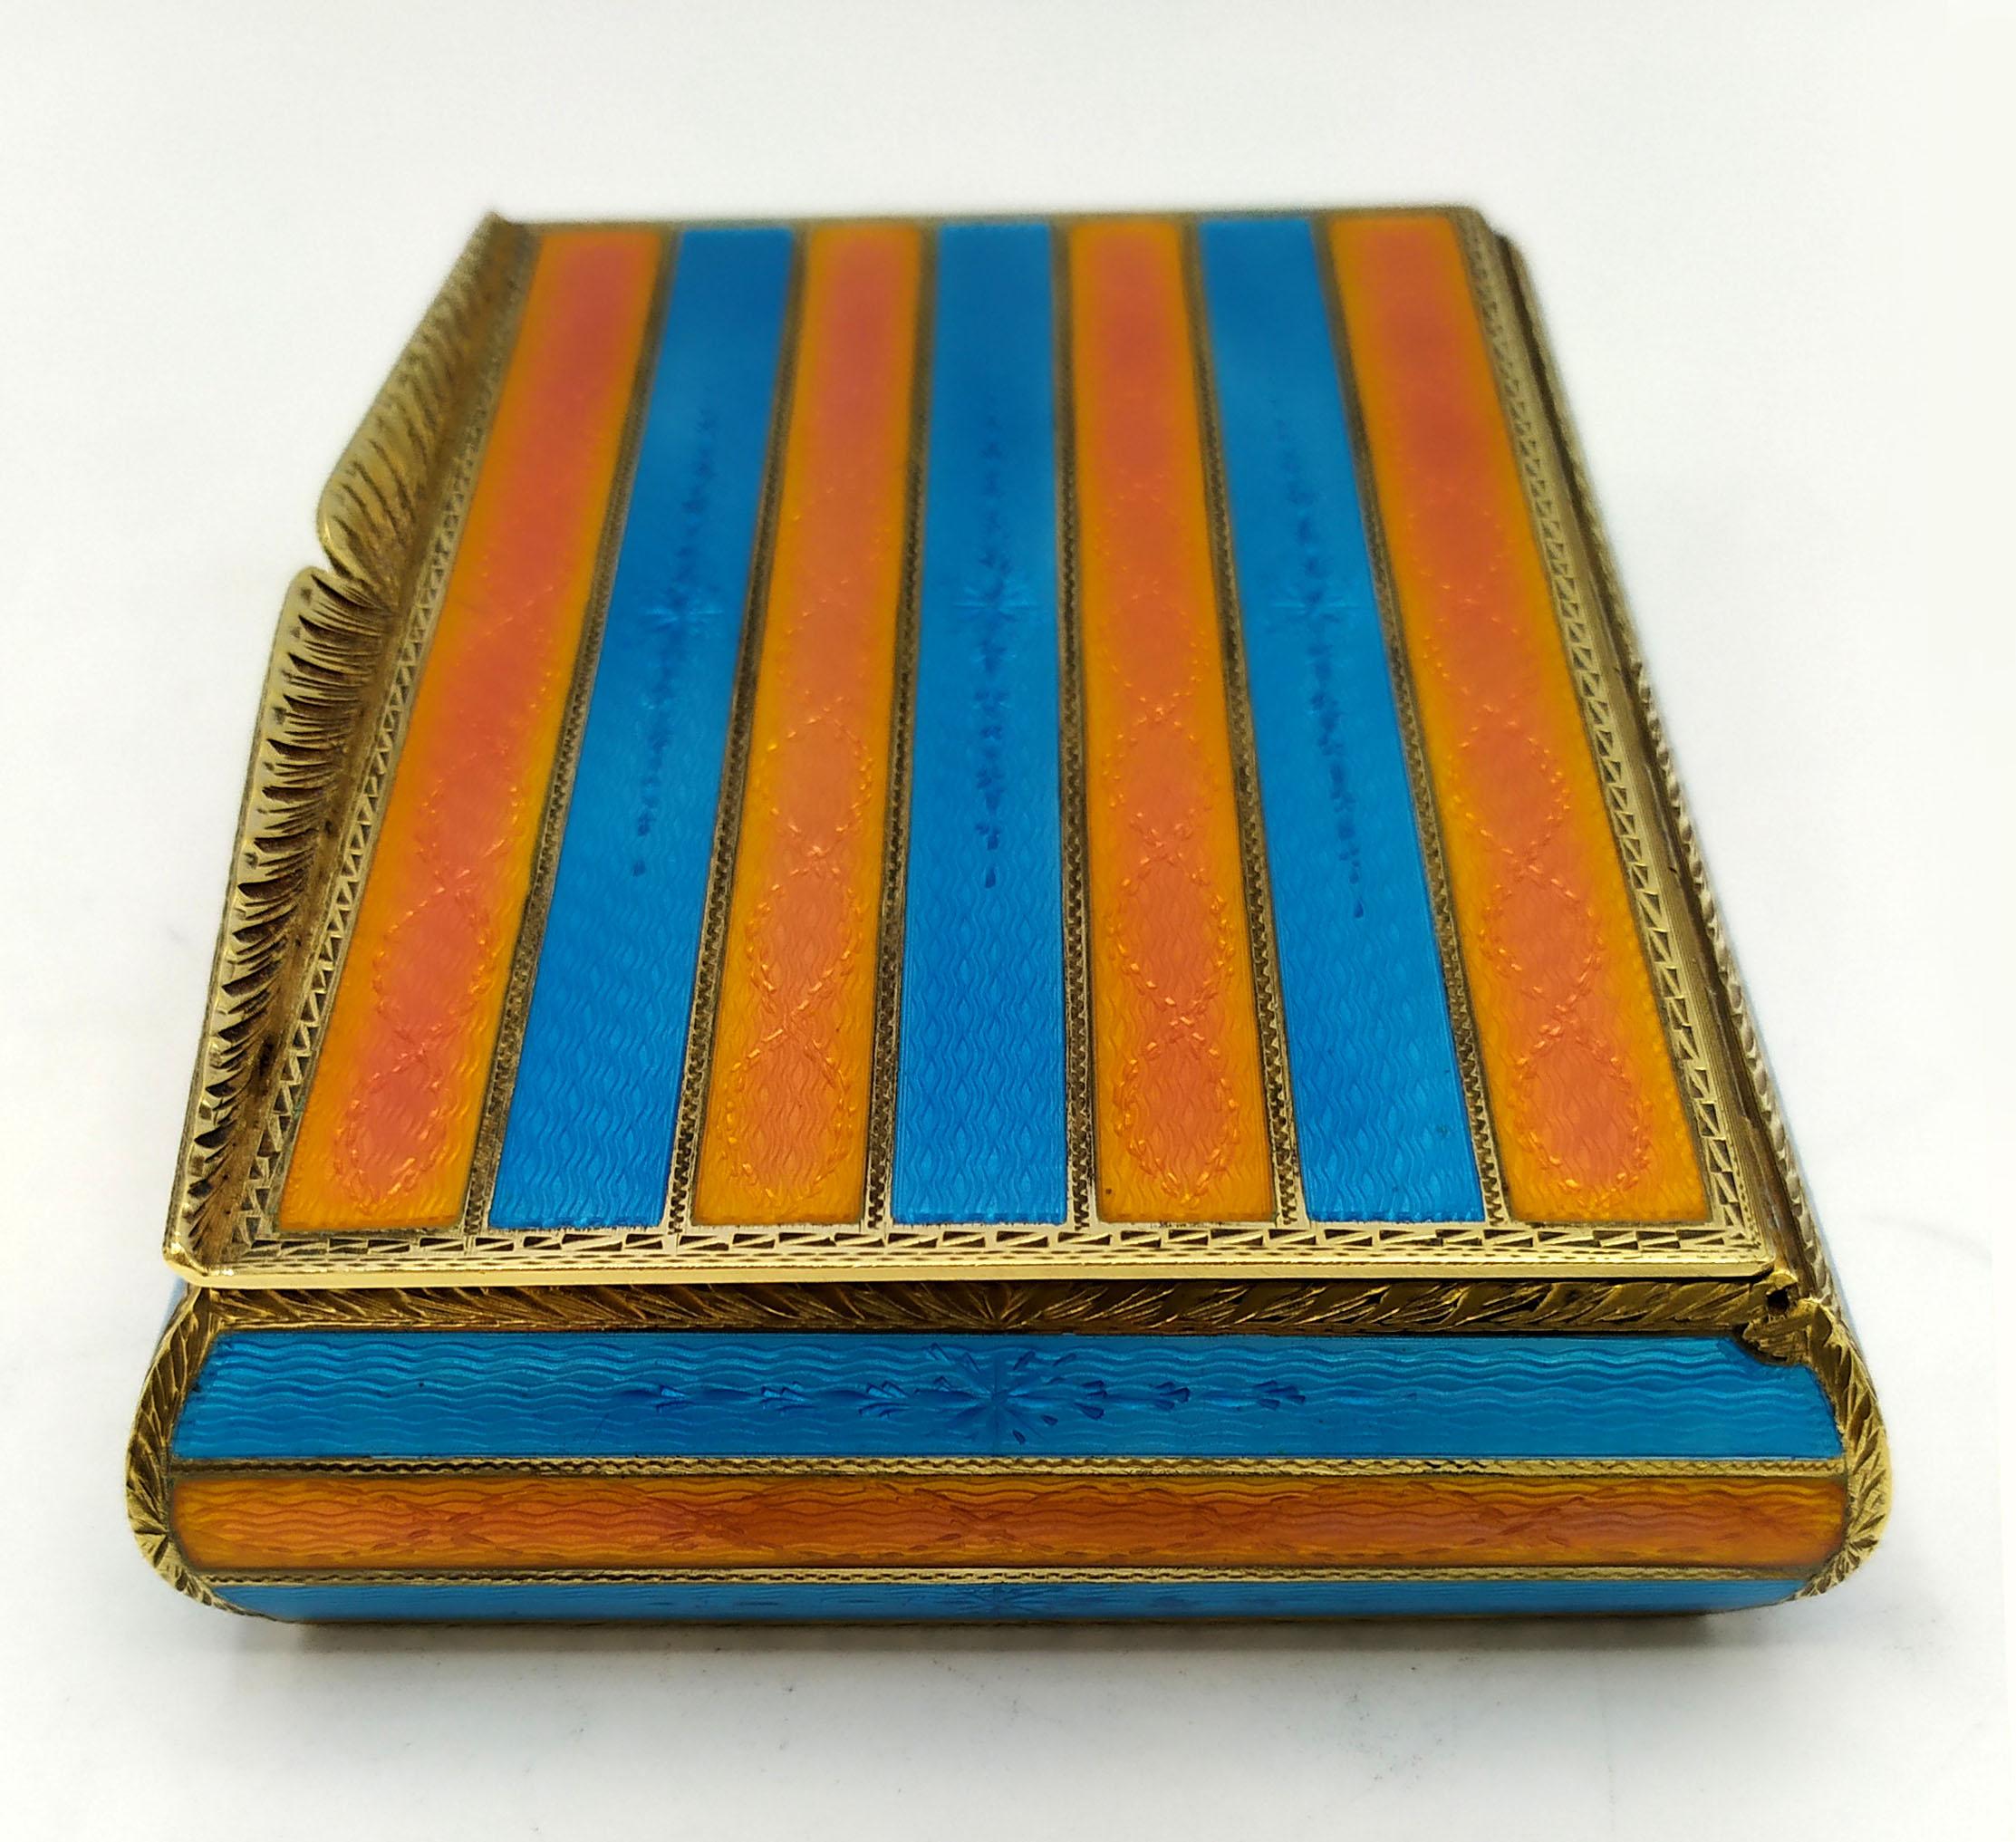 This superb Table Cigar Box two-tone stripes enamel is in 925/1000 sterling silver.
it has a rectangular shape with rounded sides Table Cigar Box has hand engraving, with orange and sky color stripes fire enameled surface on guilloche all around (